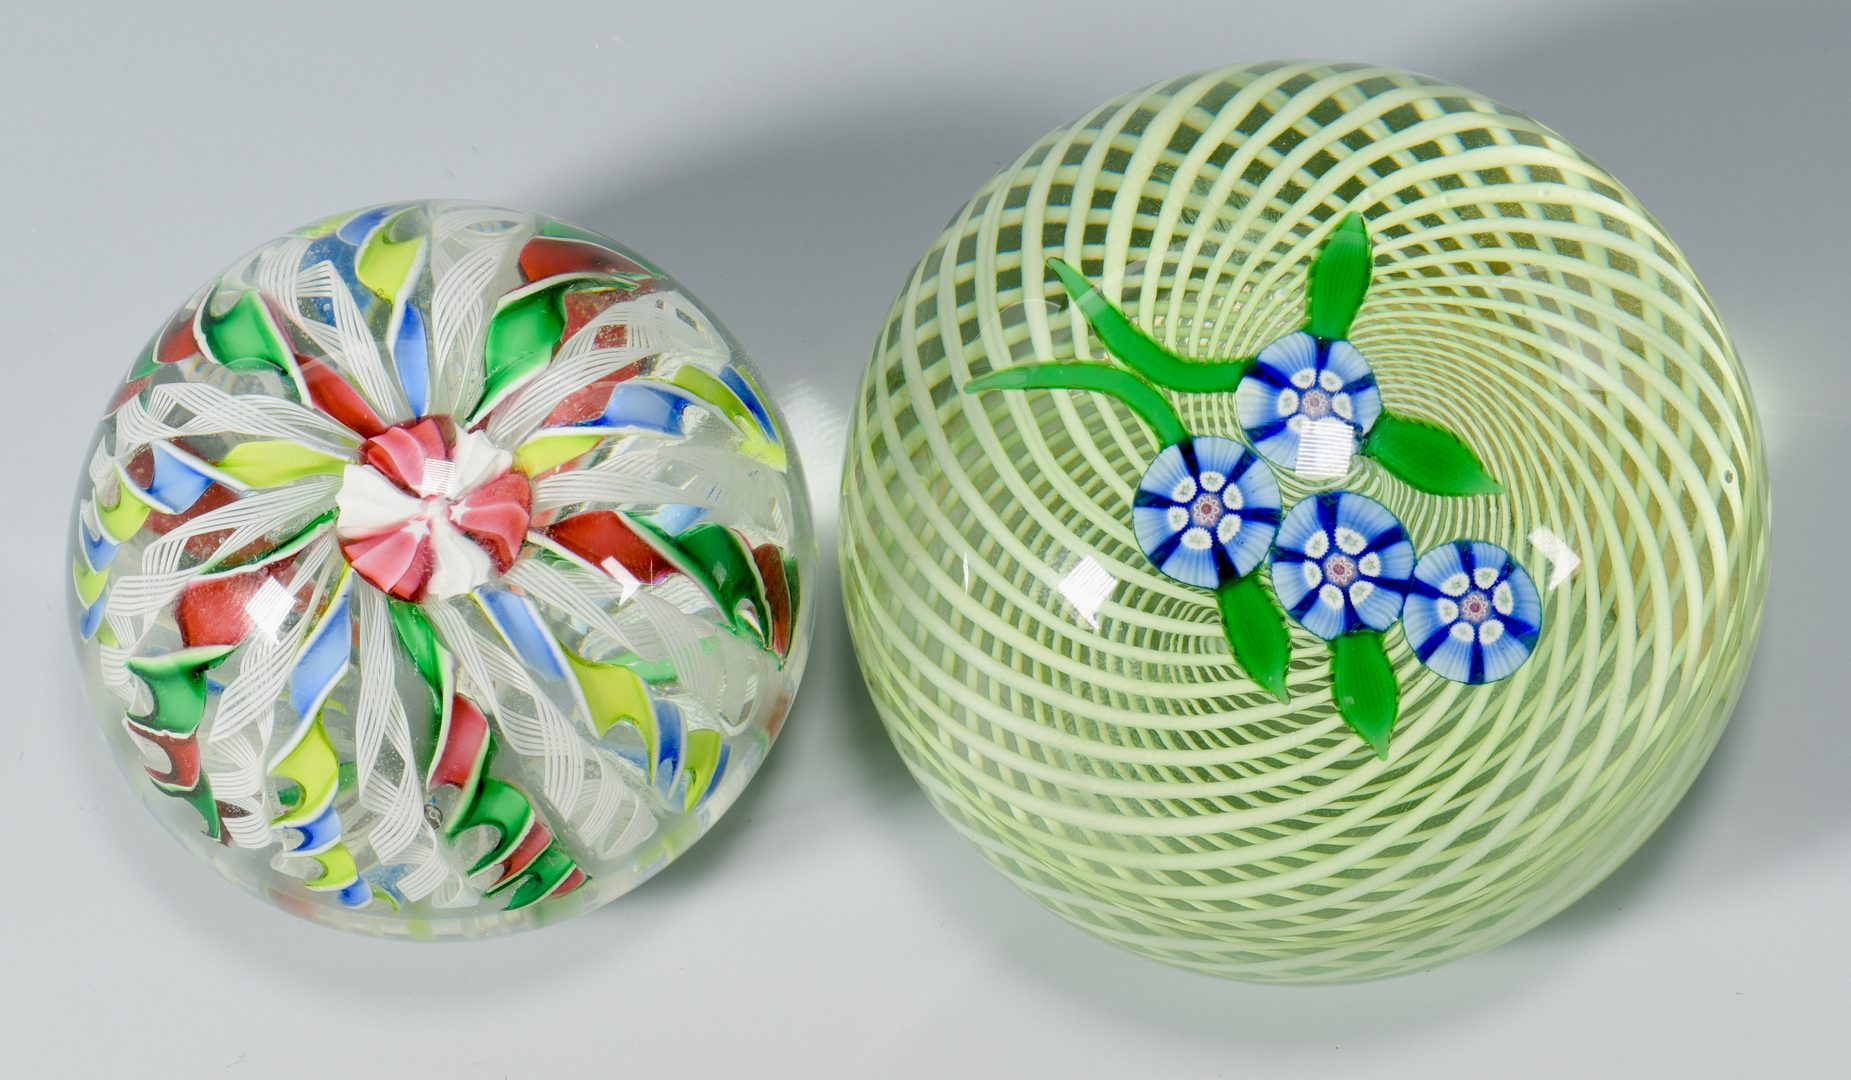 Lot 903: 4 Glass Paperweights